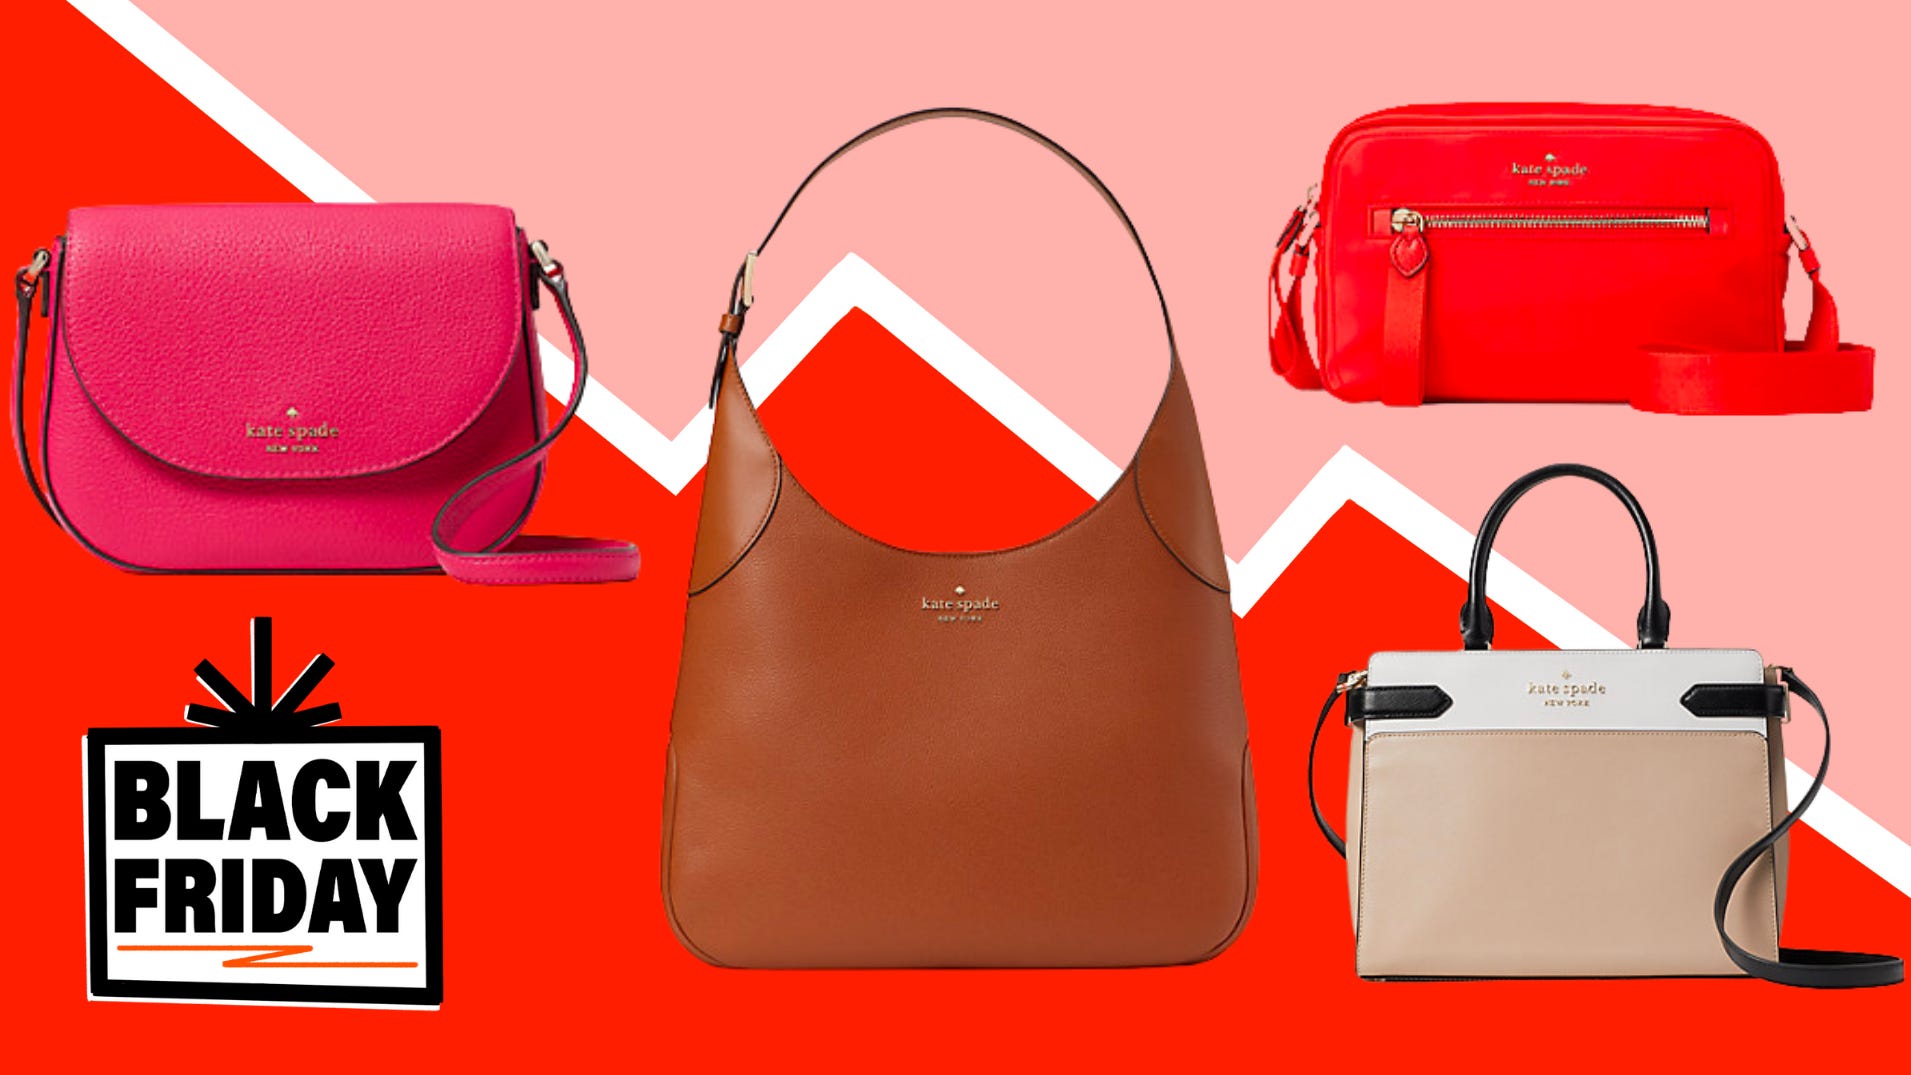 Cyber Monday 2021: The best Kate Spade purse deals you can buy